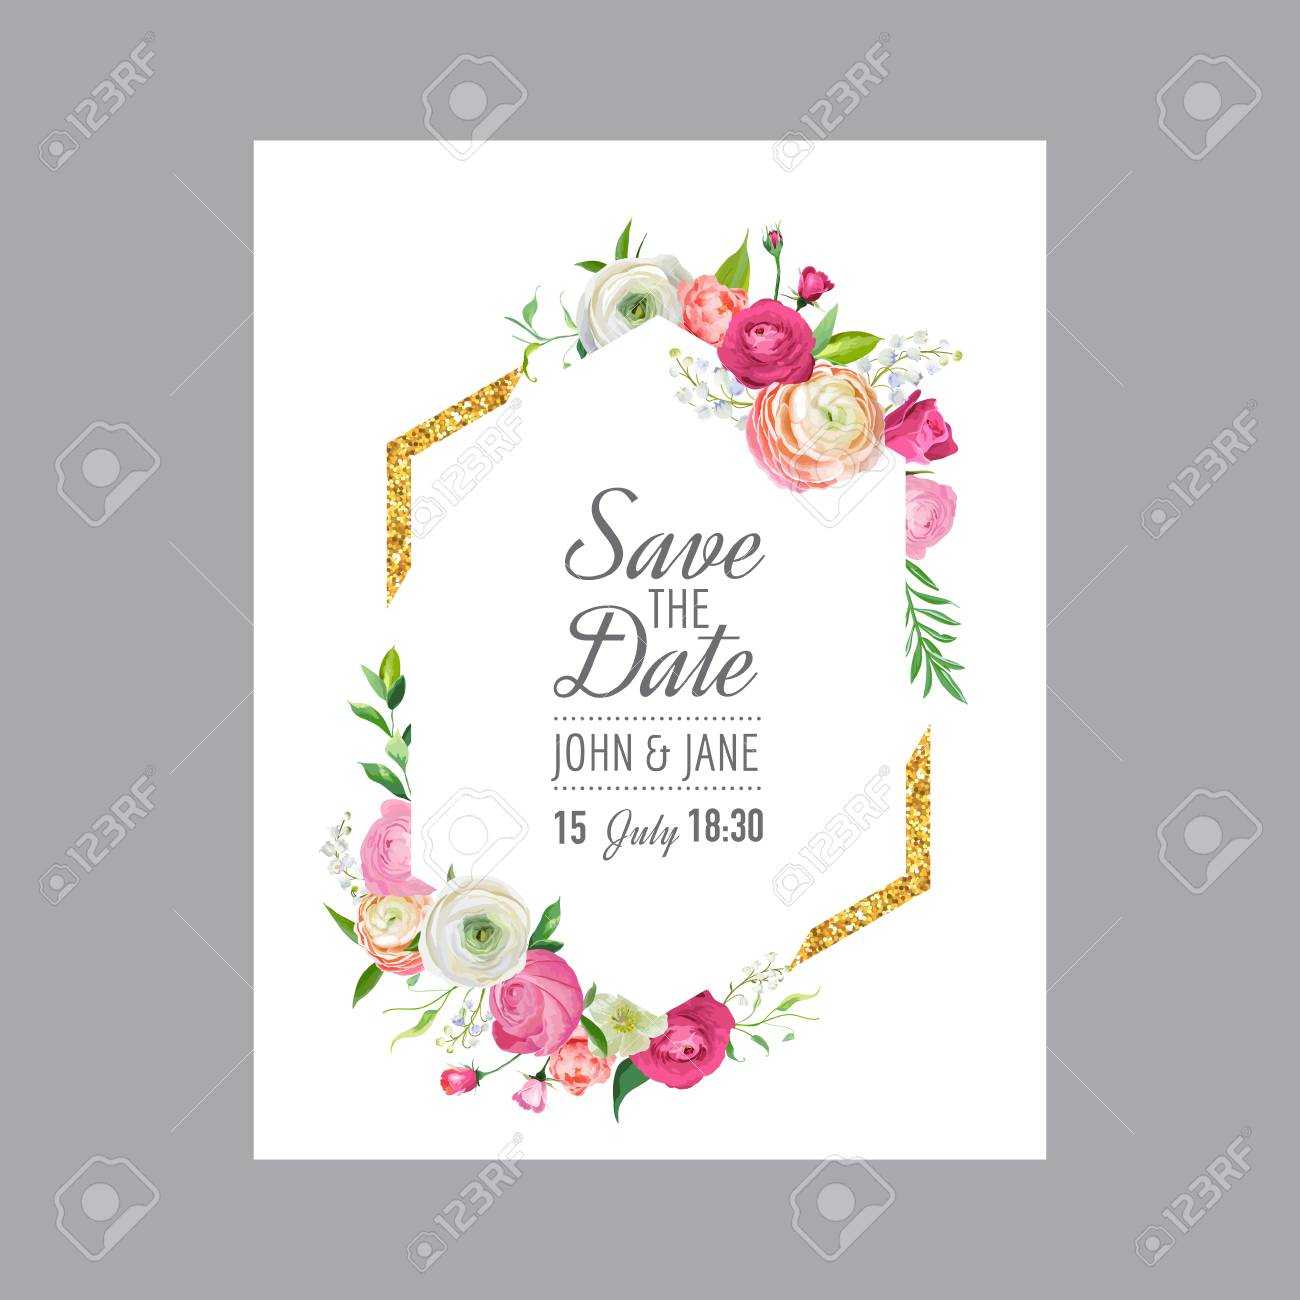 Save The Date Card Template With Gold Glitter Frame And Pink.. With Save The Date Cards Templates